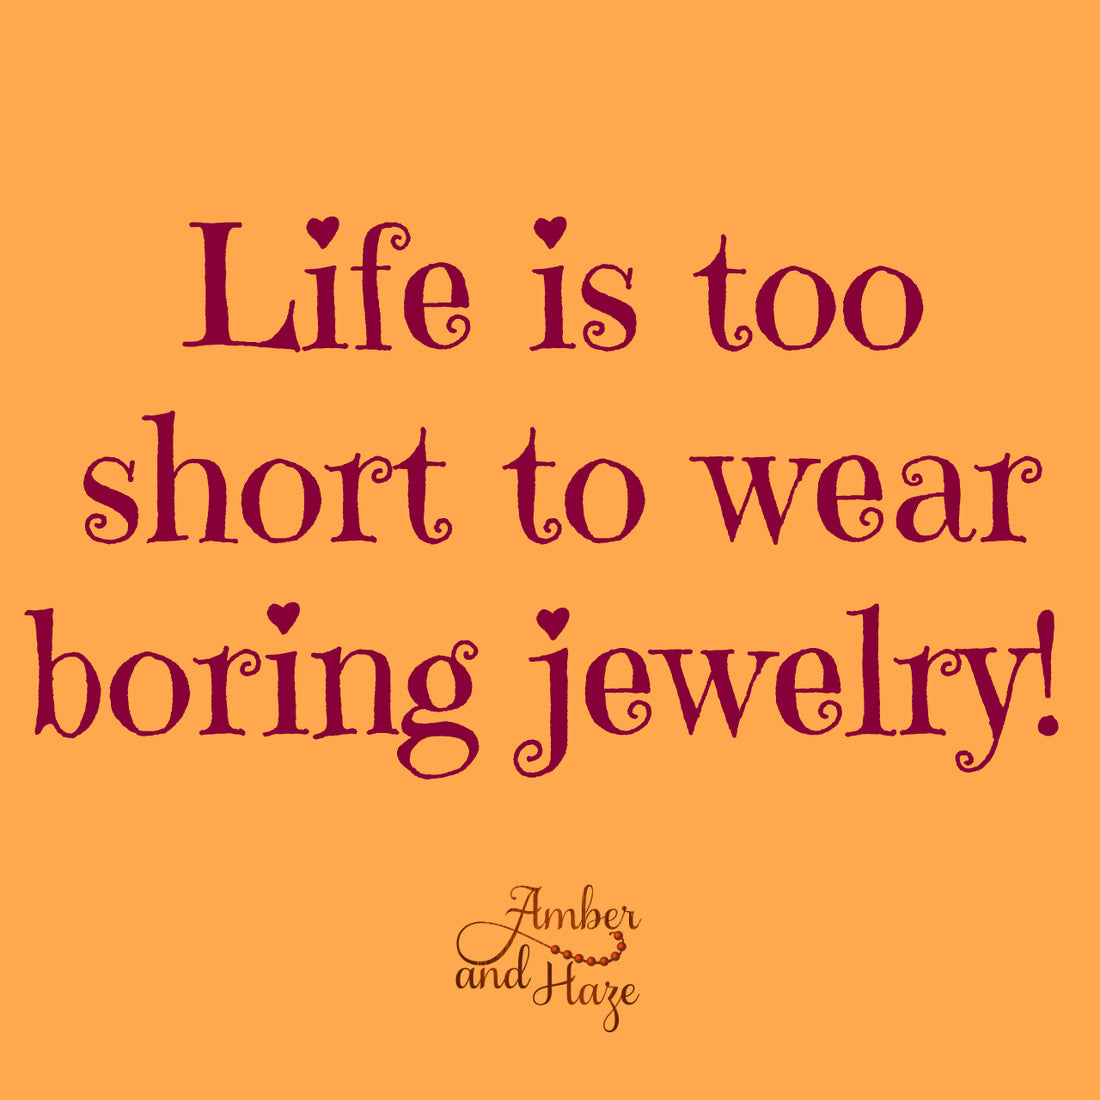 life is too short to wear boring jewelry